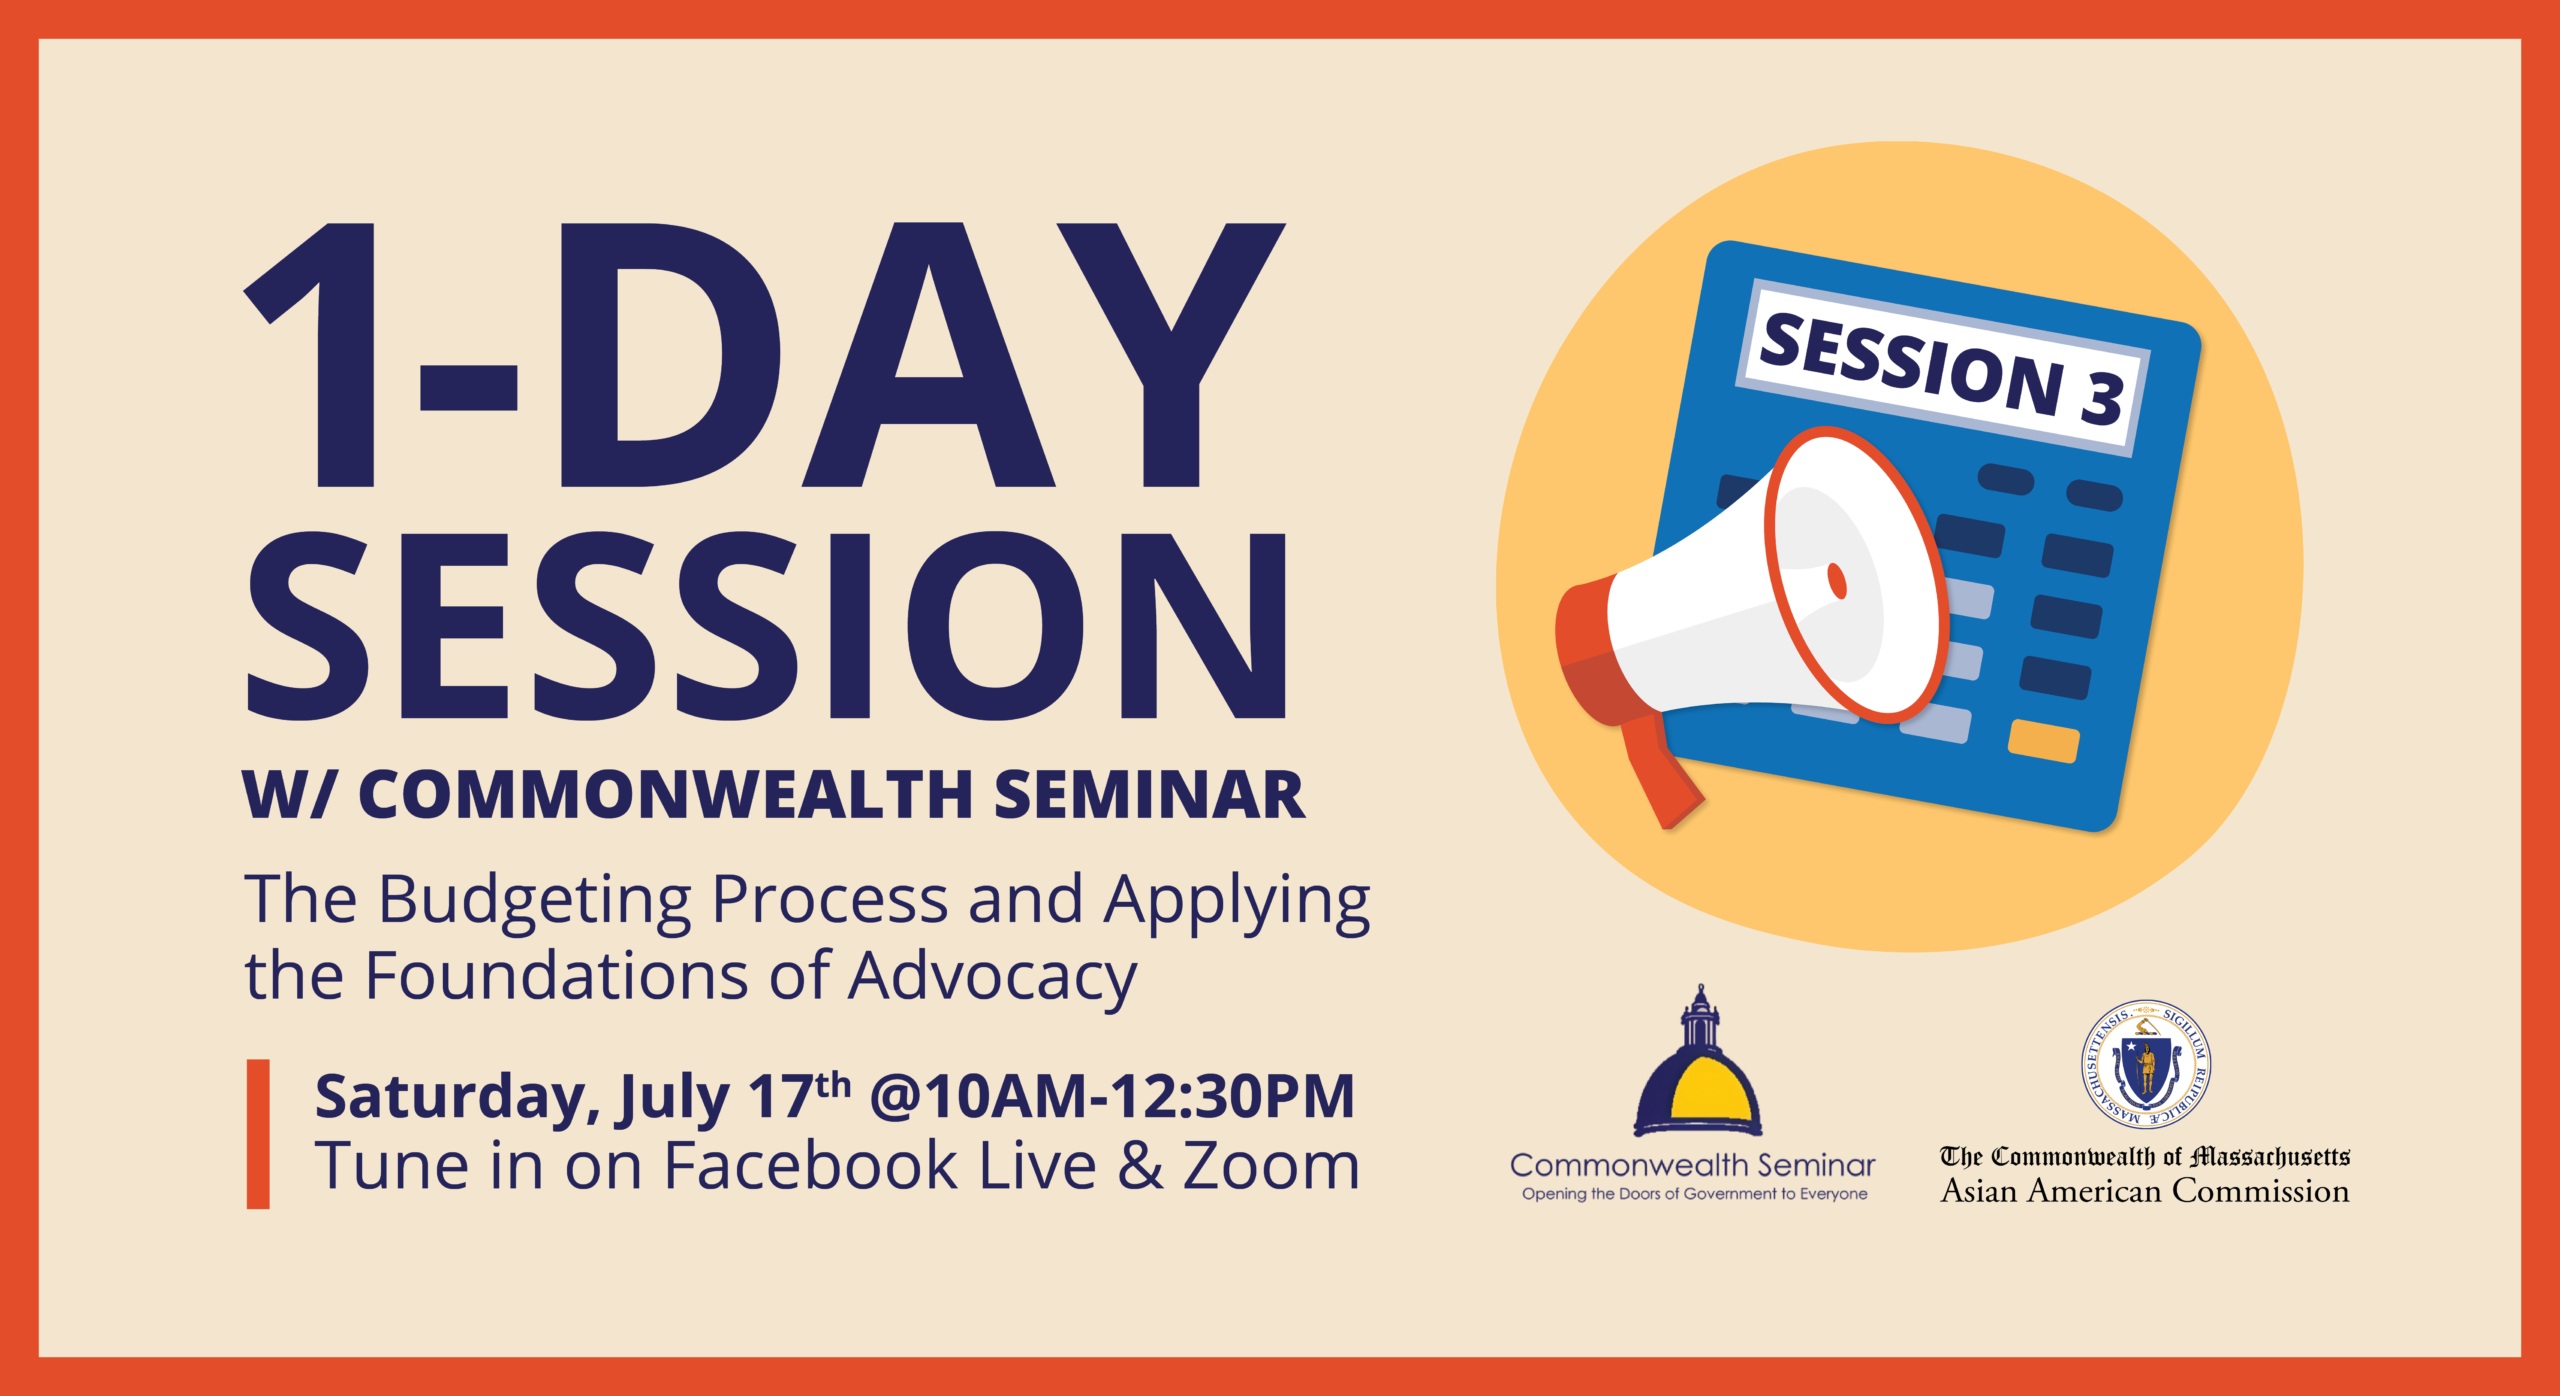 Session 3: 1-Day Session w/ Commonwealth Seminar | The Budget Process & Applying the Foundations of Advocacy